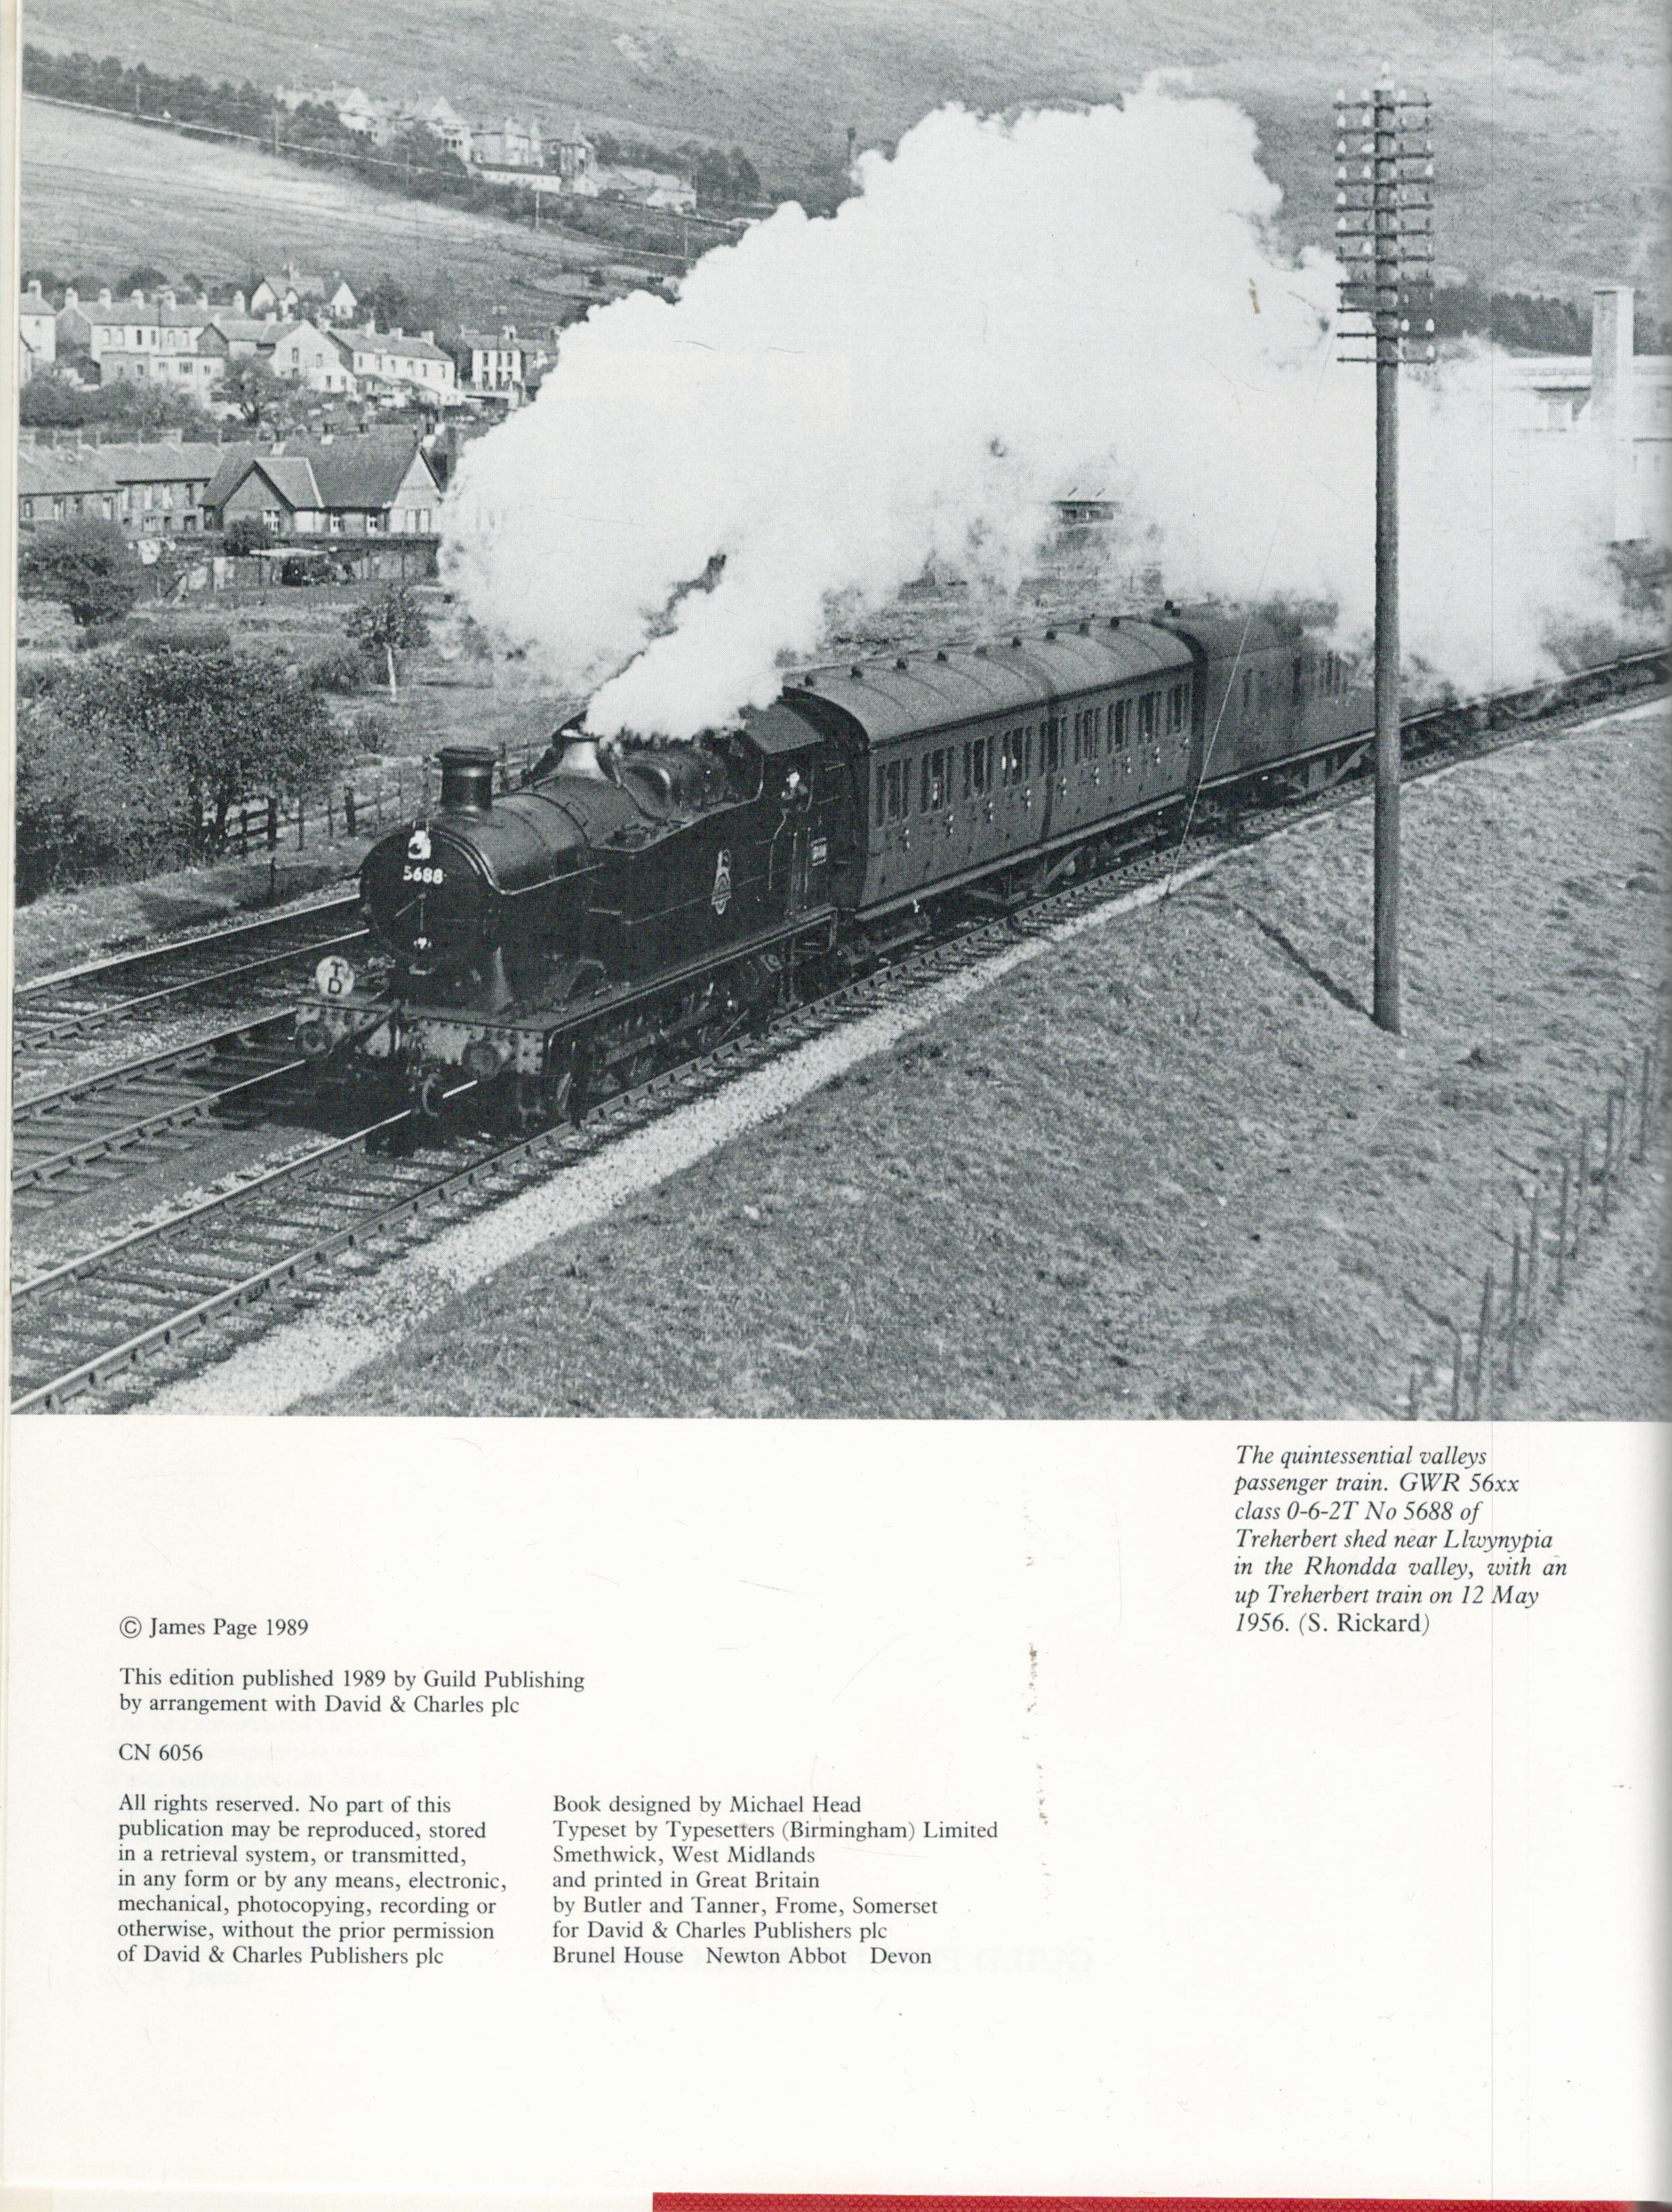 Rails in The Valleys by James Page 1989 edition unknown Hardback Book with 192 pages published by - Image 3 of 3